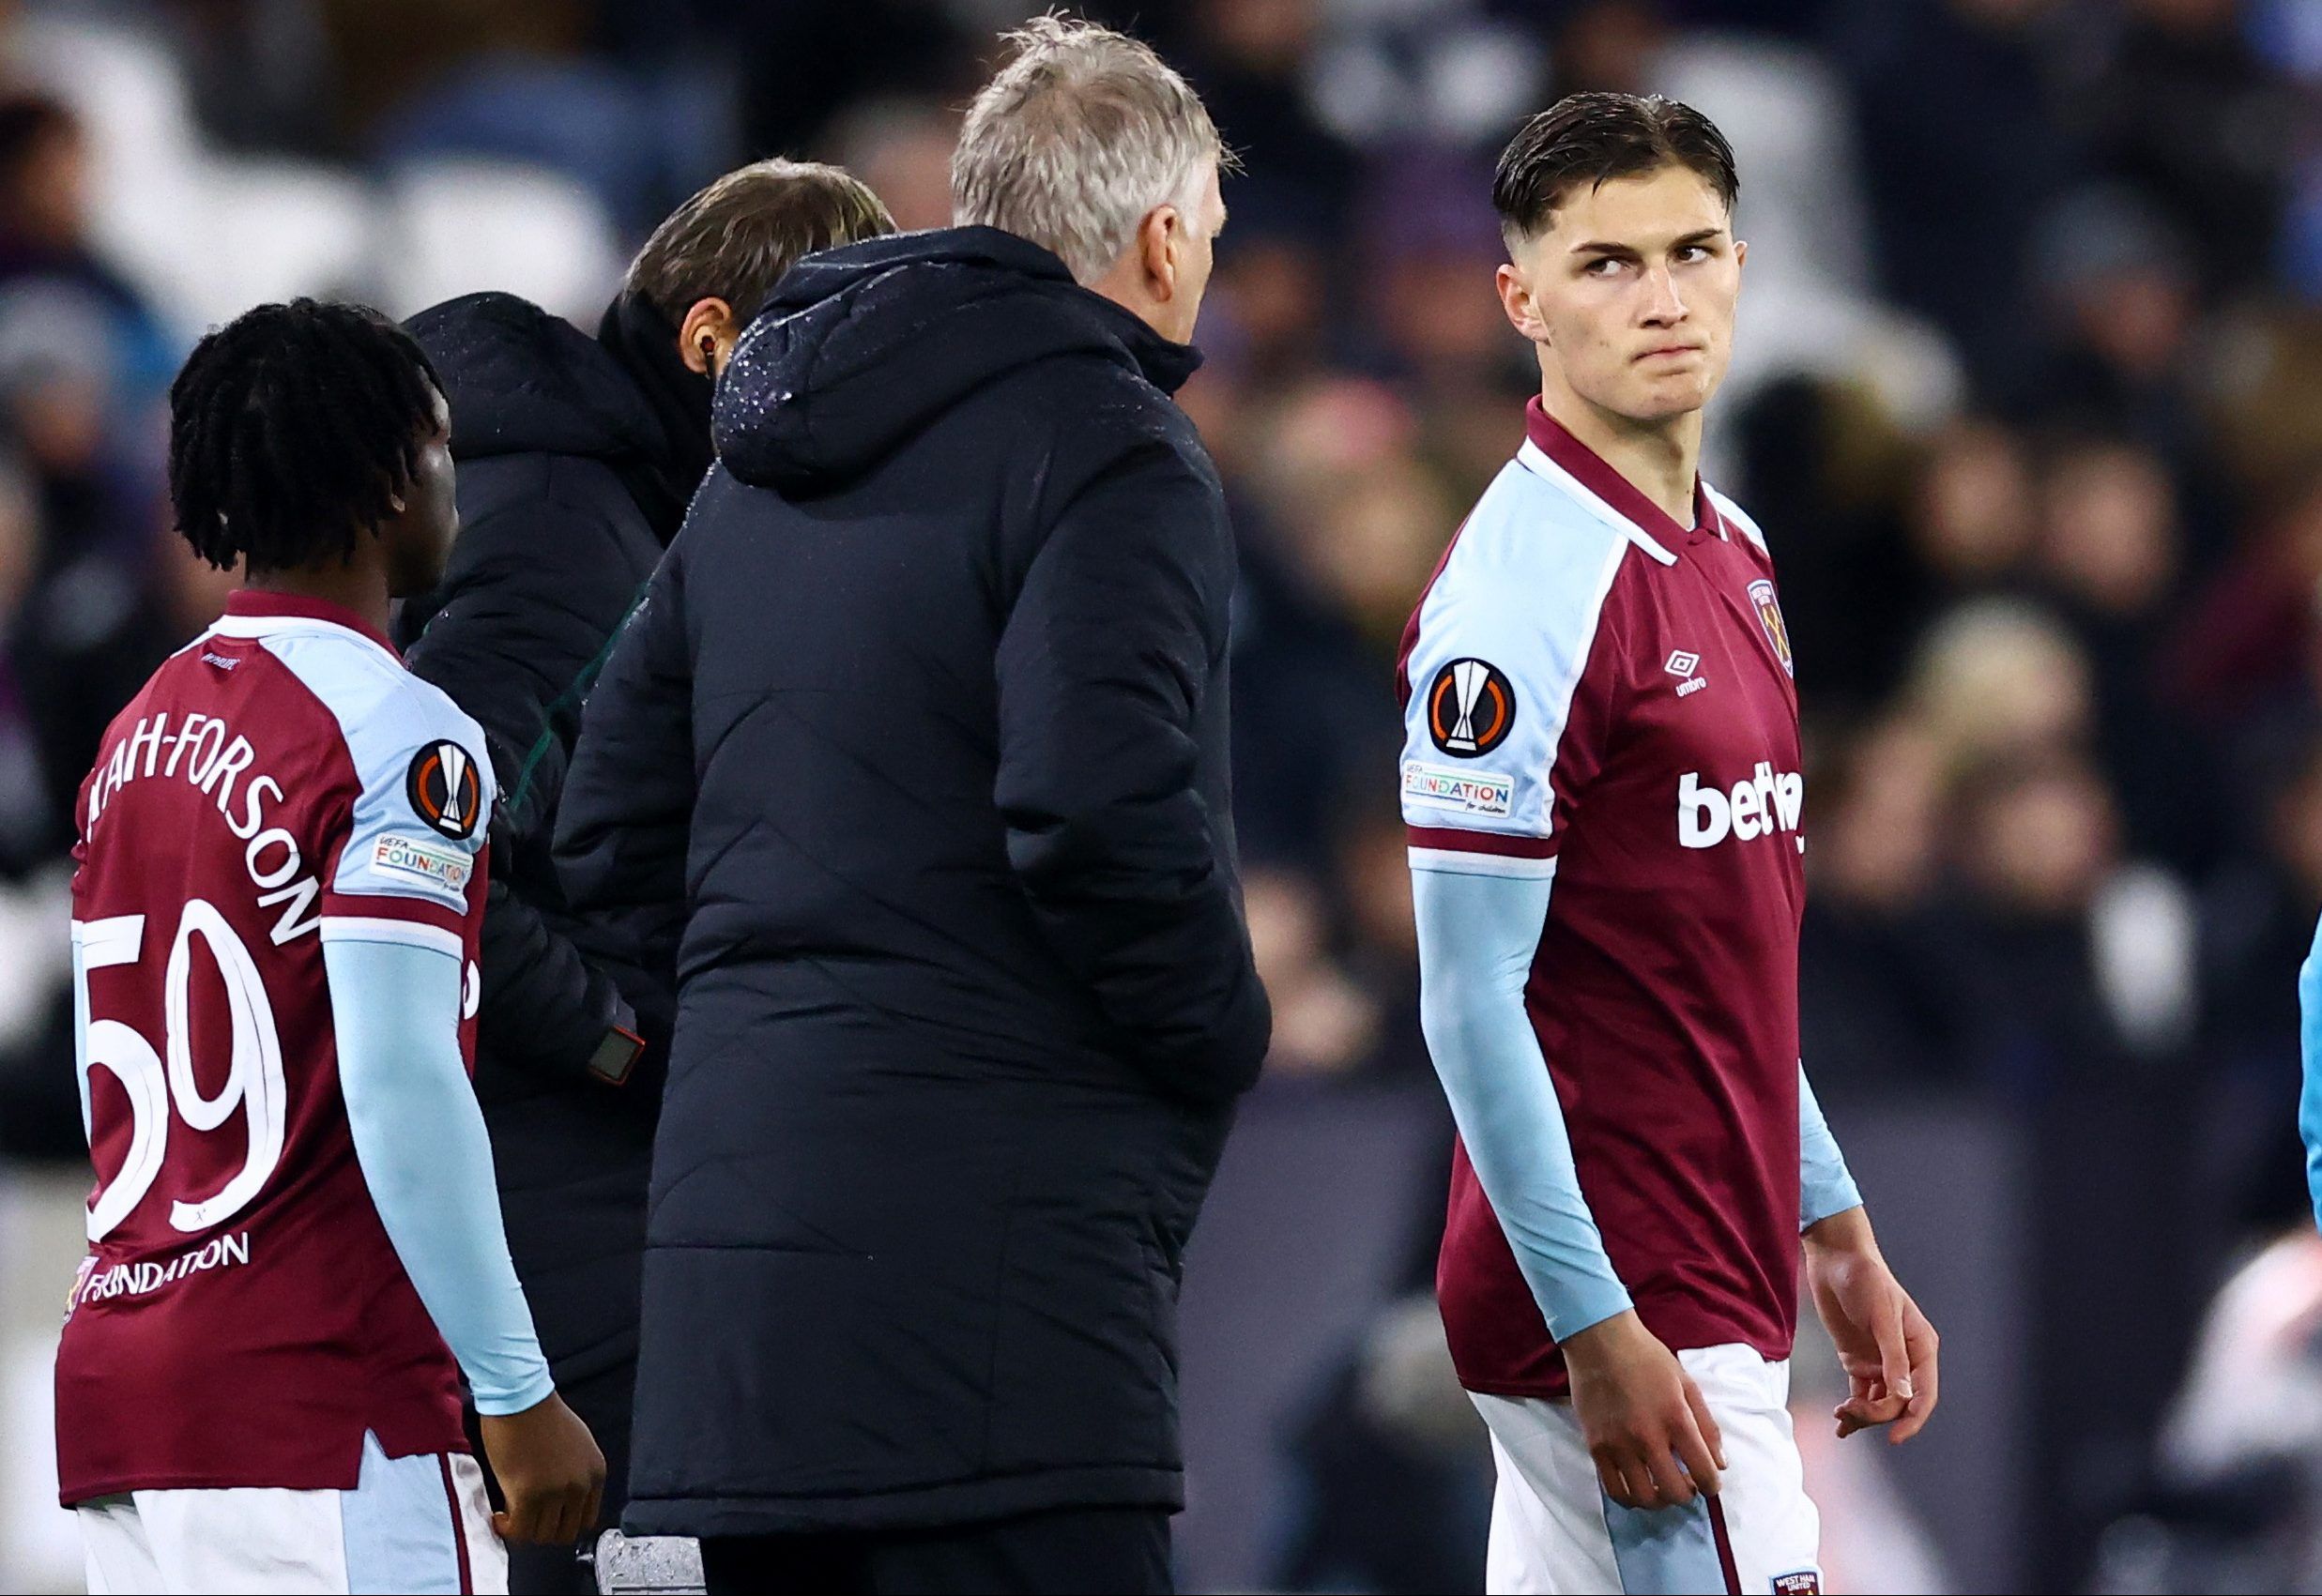 Soccer Football - Europa League - Group H - West Ham United v Dinamo Zagreb - London Stadium, London, Britain - December 9, 2021  West Ham United manager David Moyes gives instructions to Freddie Potts as he and Keenan Forson prepare to come on as a substitutes REUTERS/David Klein